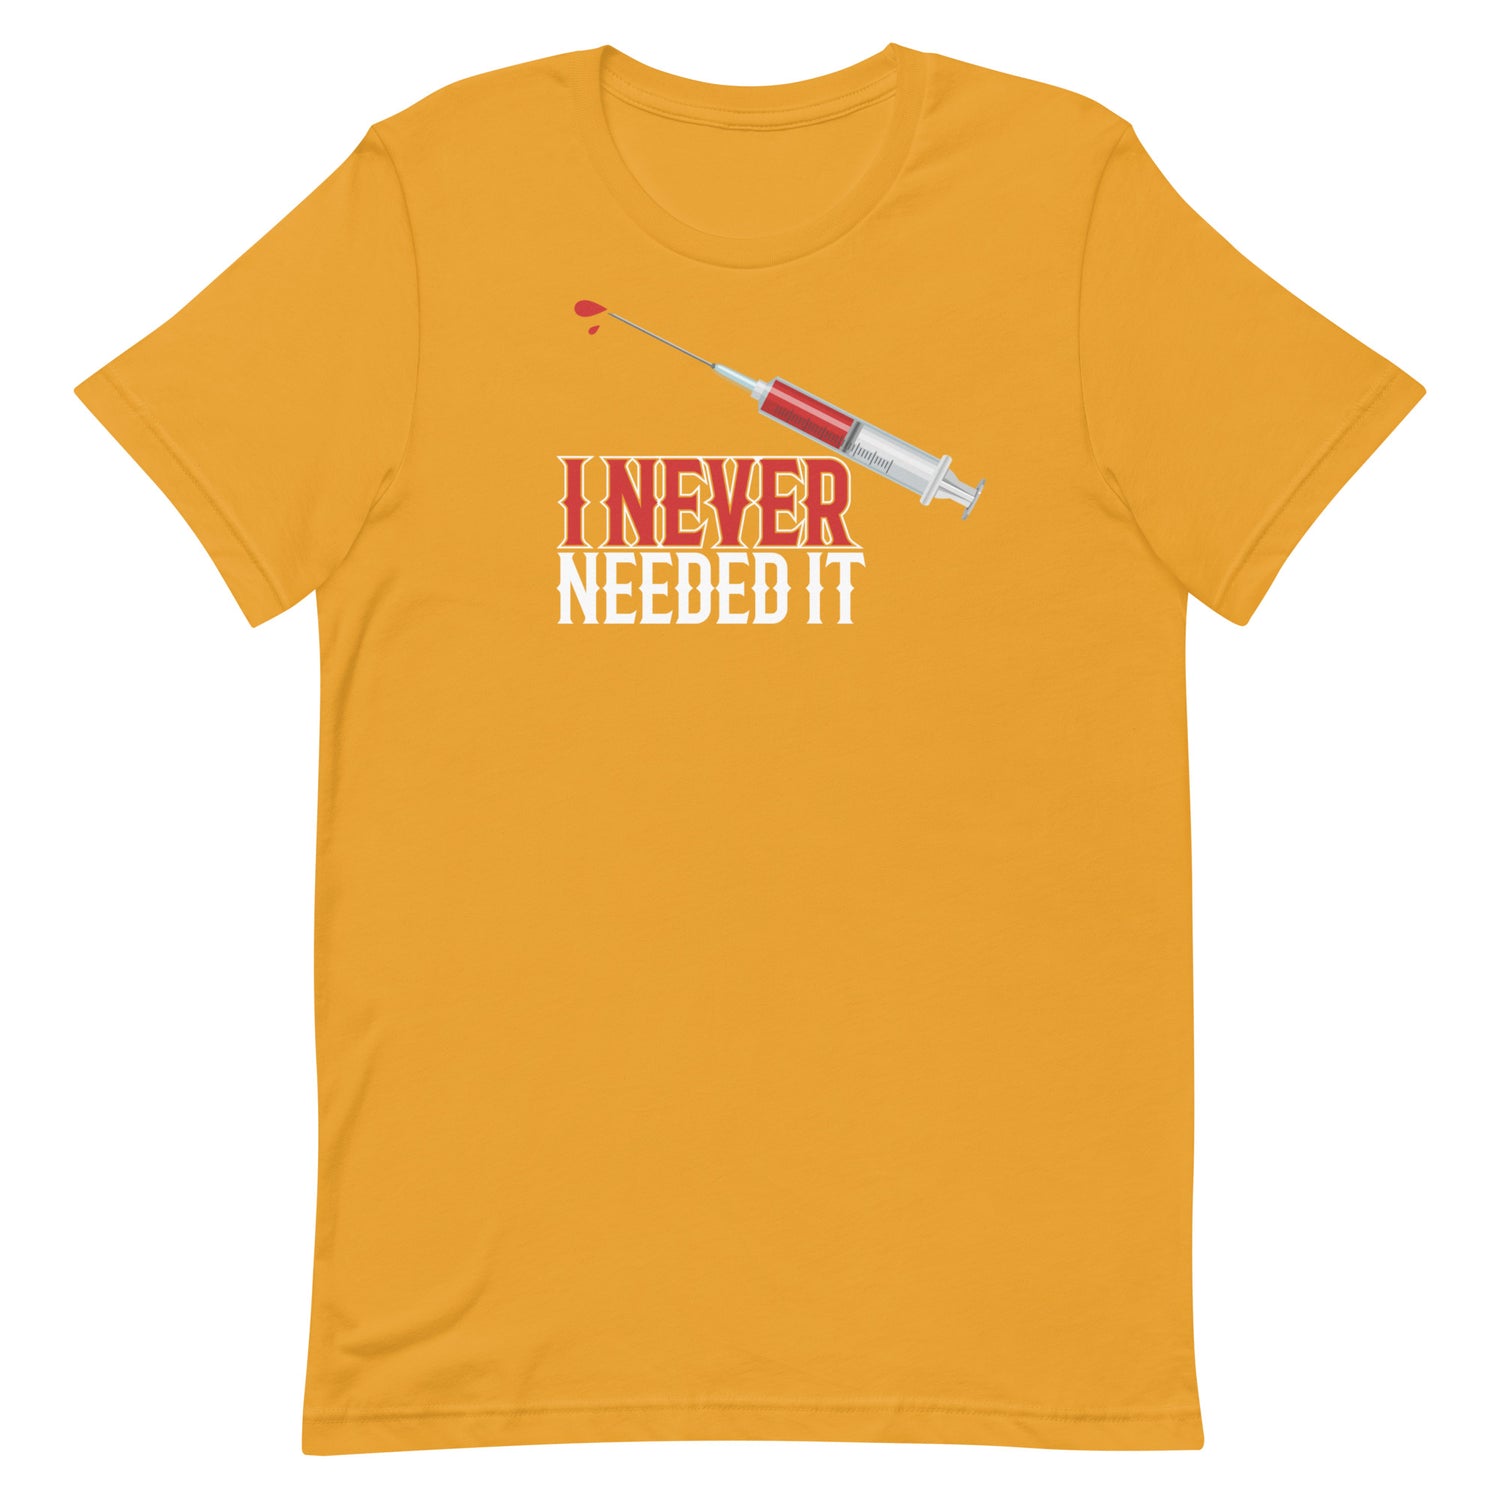 I NEVER NEEDED IT MENS FRONT AND BACK T-SHIRT